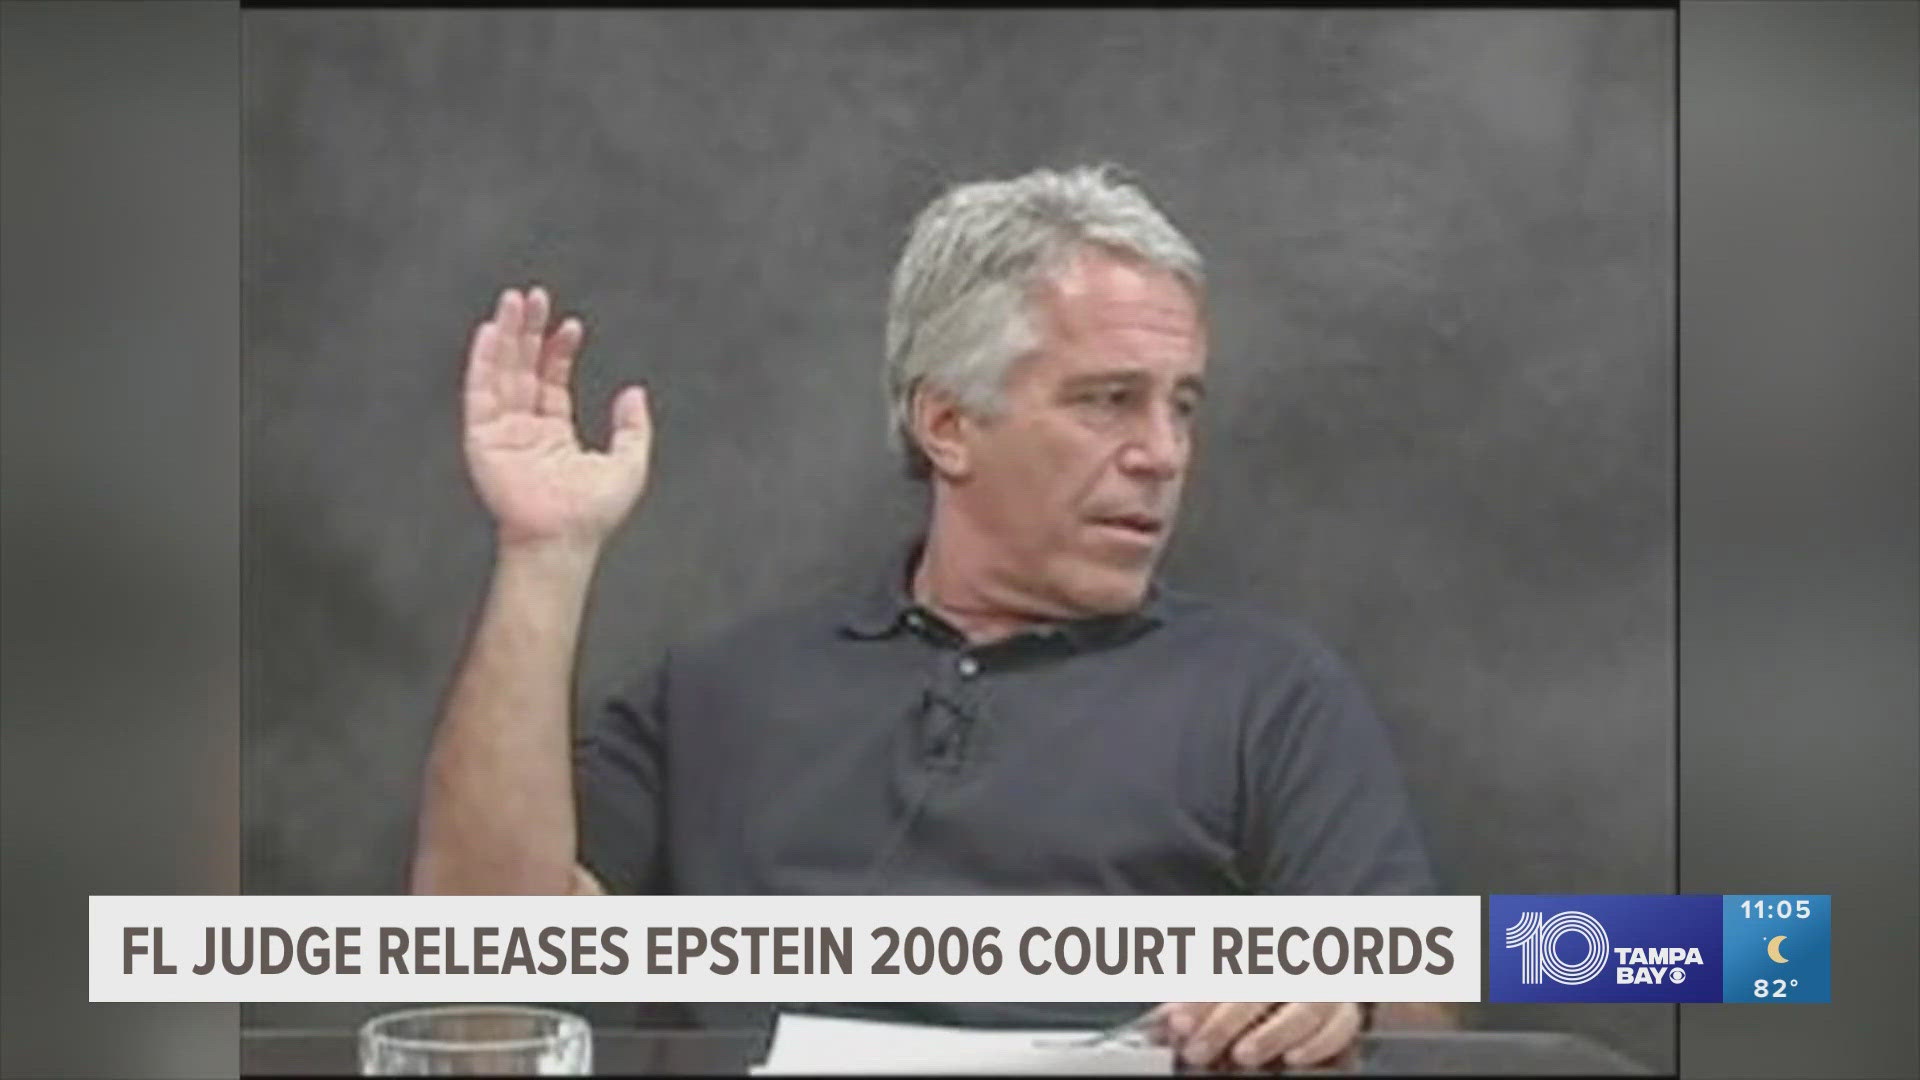 In his order, the judge called Epstein “the most infamous pedophile in American history."